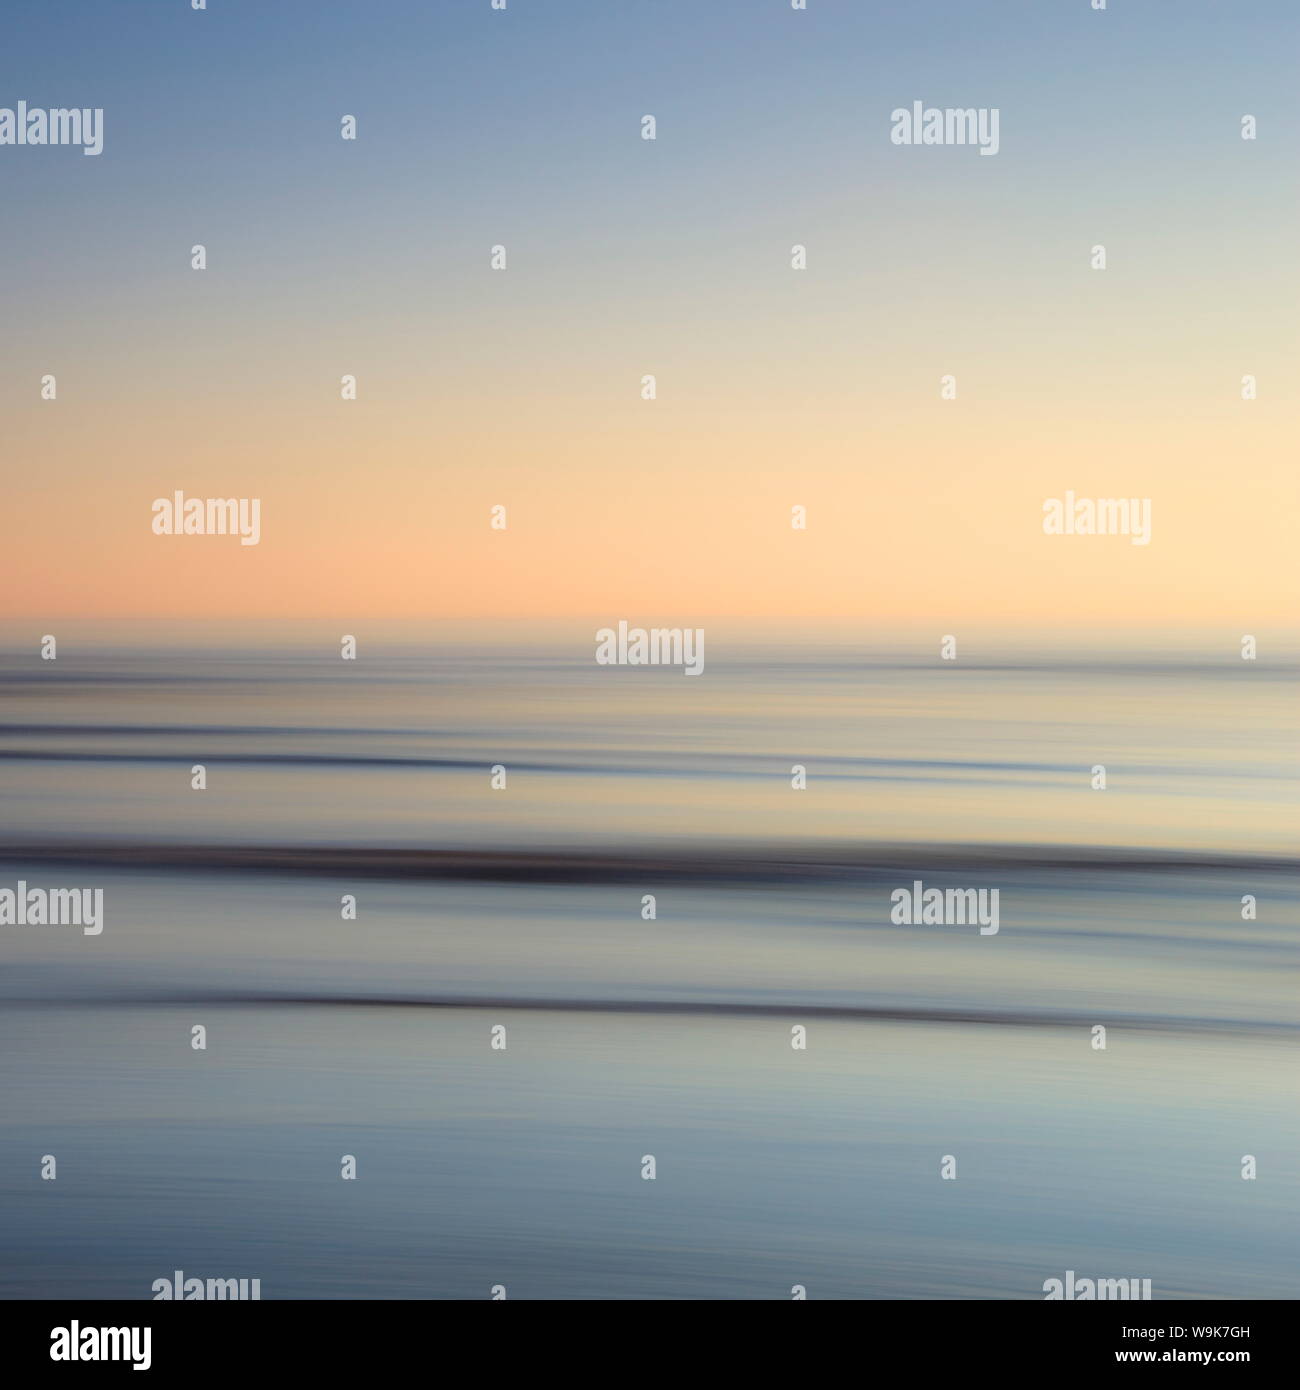 Abstract image of the view from Alnmouth Beach to the North Sea, Alnmouth, Northumberland, England, United Kingdom, Europe Stock Photo